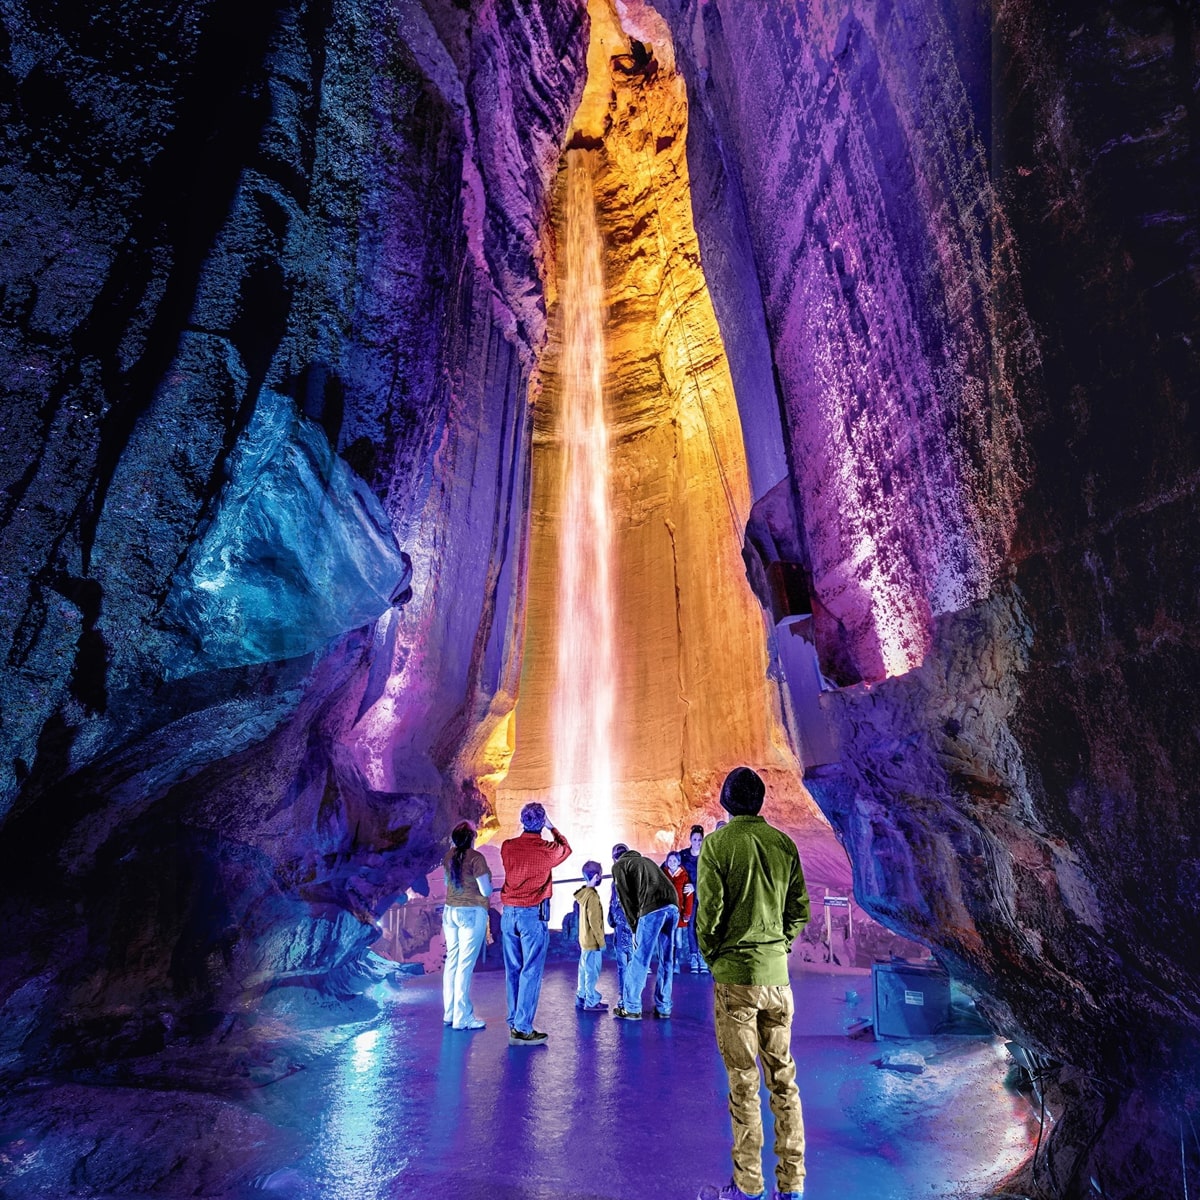 People looking up at Ruby Falls